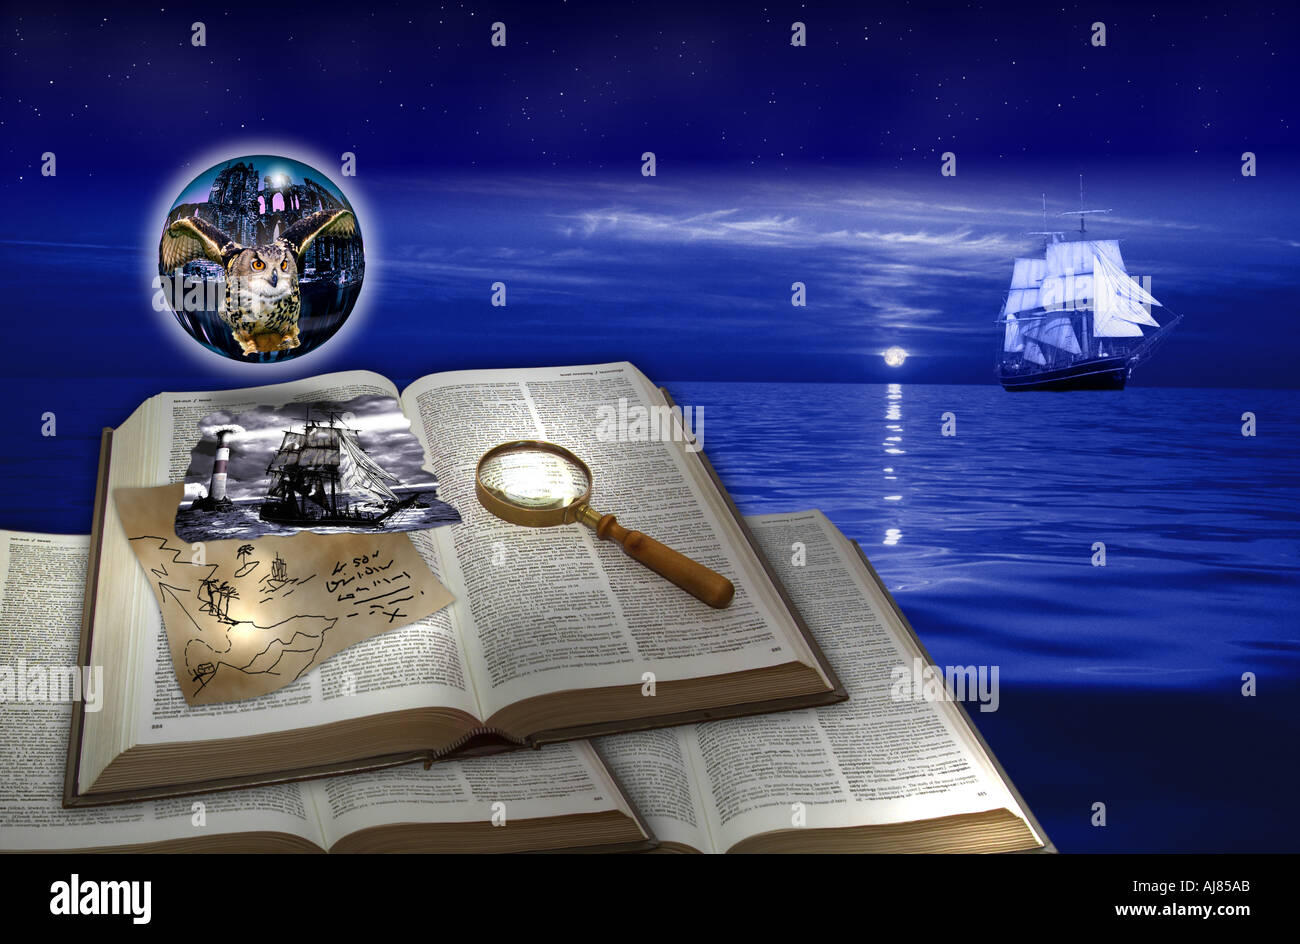 Concept ,Children's, Ghost,Adventure, Story, montage,book,Treasure island, Harry Potter,map,moon,rise,book, Stock Photo